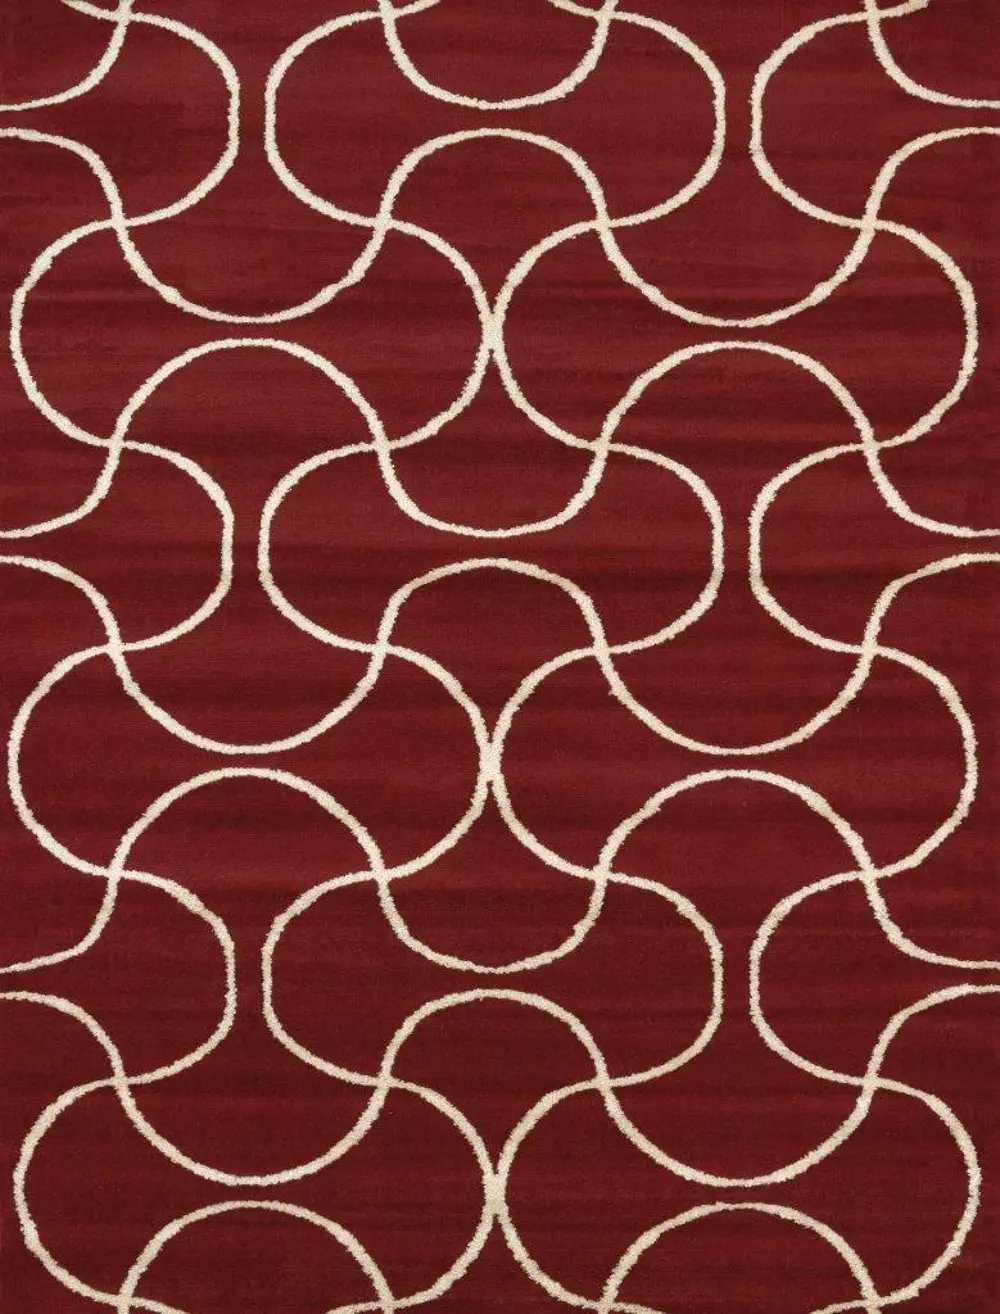 5 x 7 Medium Transitional Red Area Rug - Visions-1